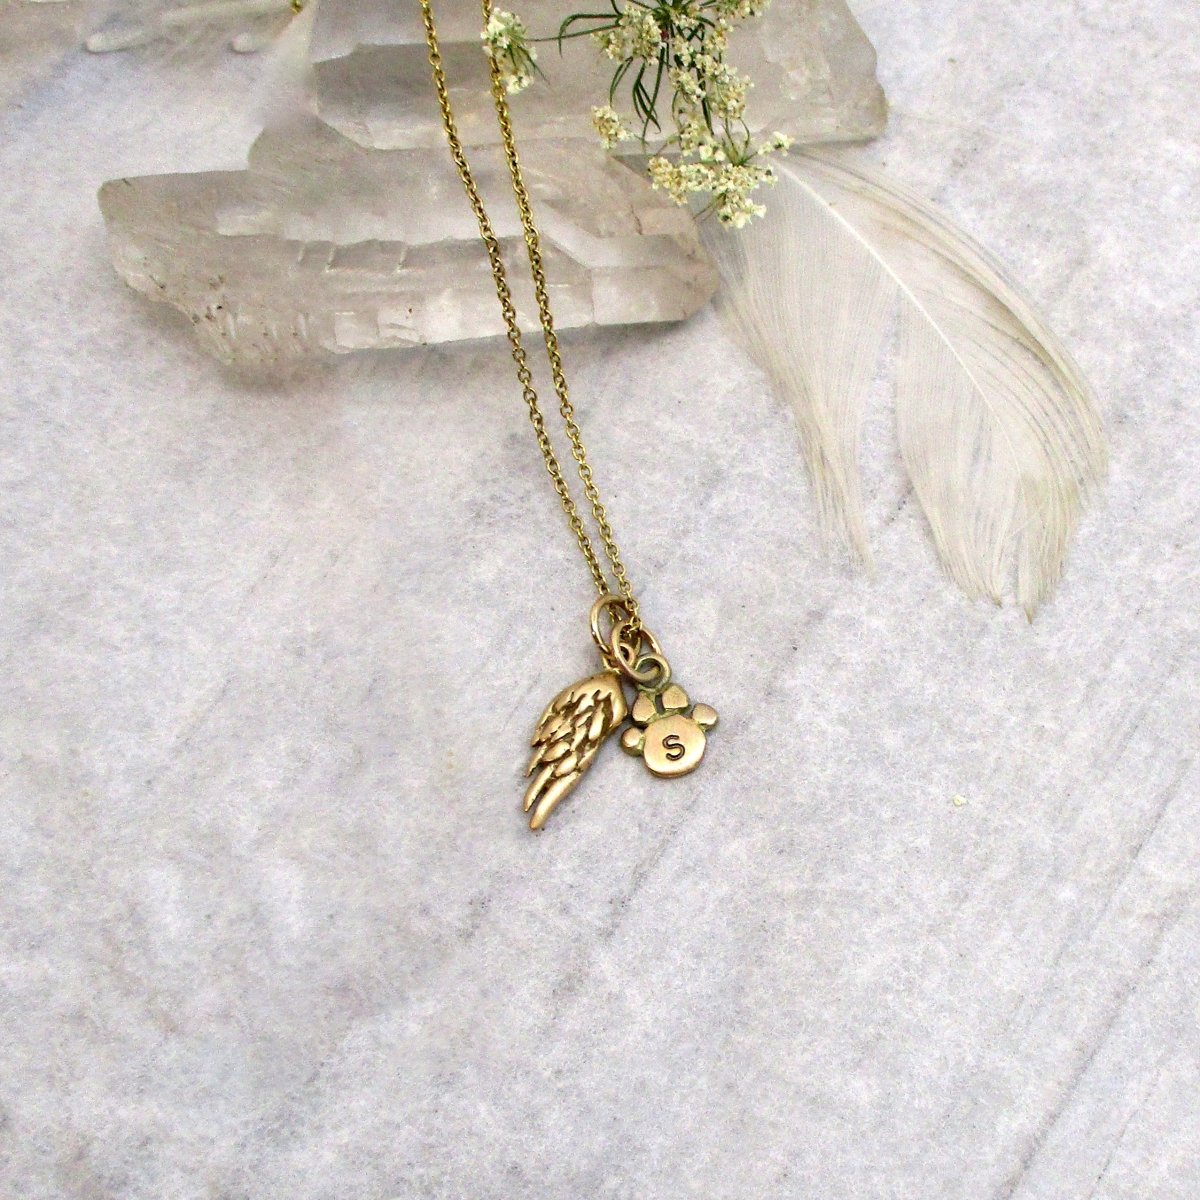 Feathered Angel Wing and Personalized Paw Necklace in Solid 14 Karat Yellow Gold - Luxe Design Jewellery